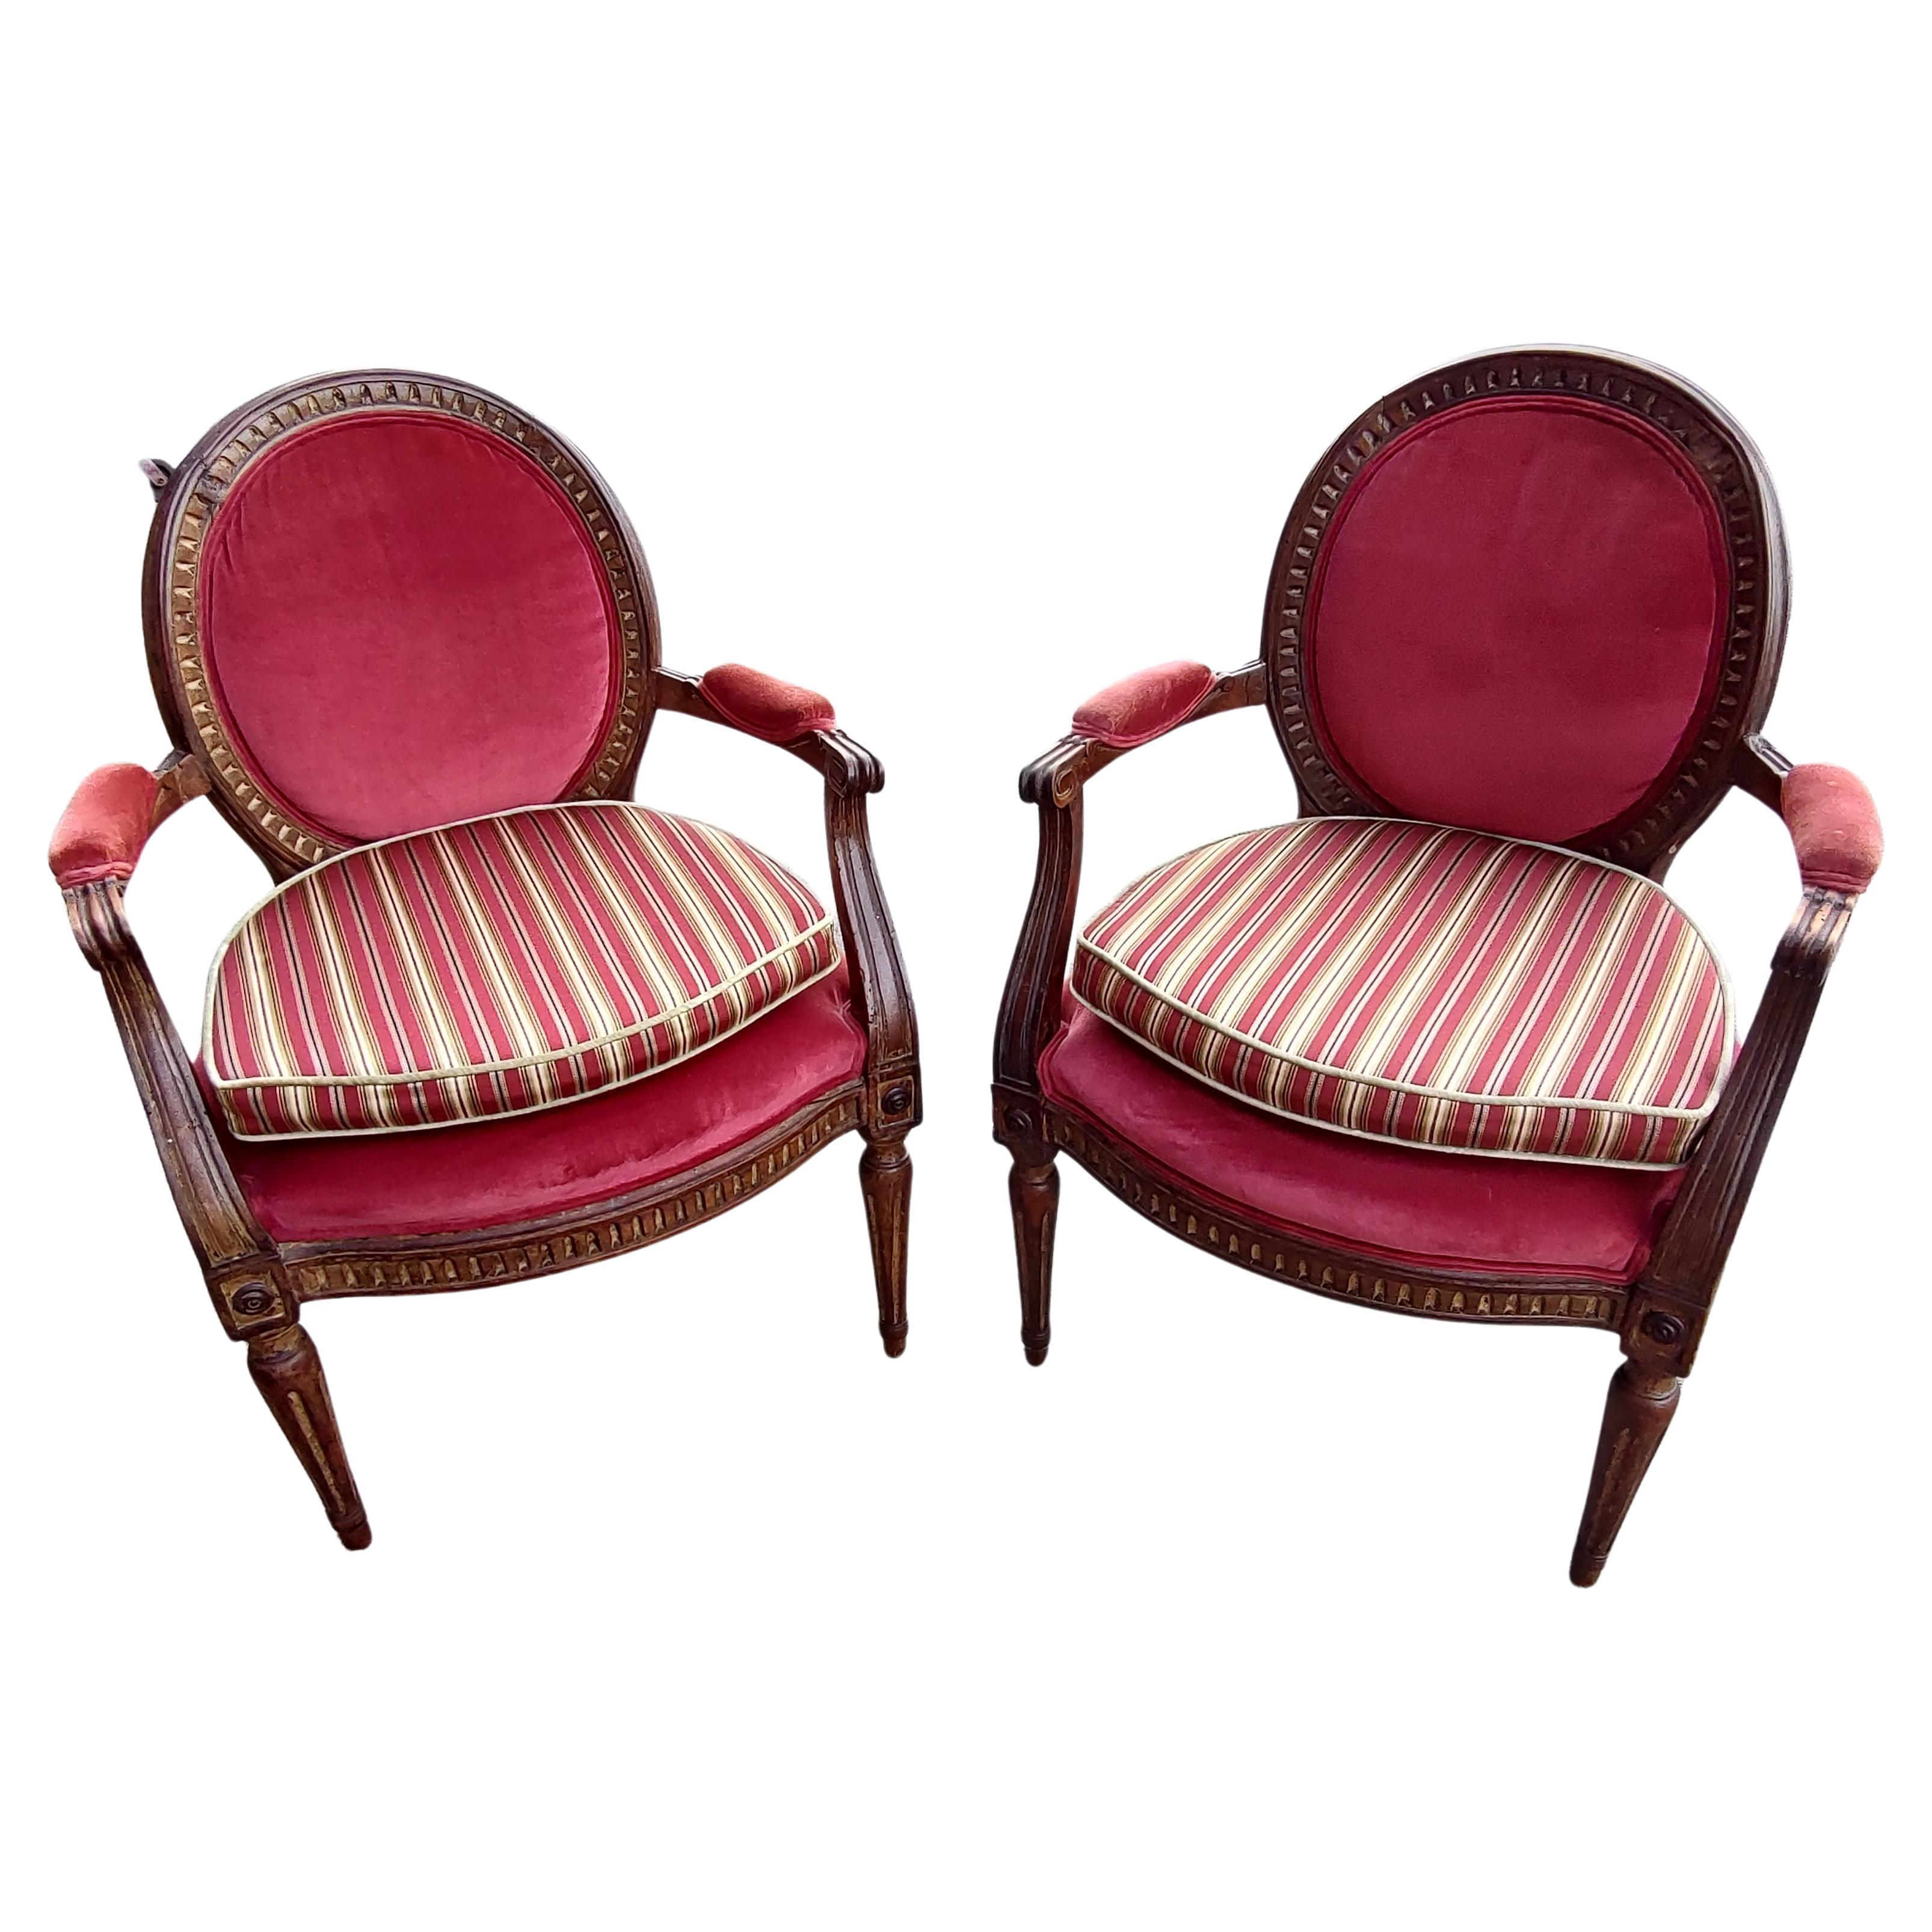 Late 19th Century Pair of 19th Century French Fauteuils Armchairs with Carved Gilt Wood